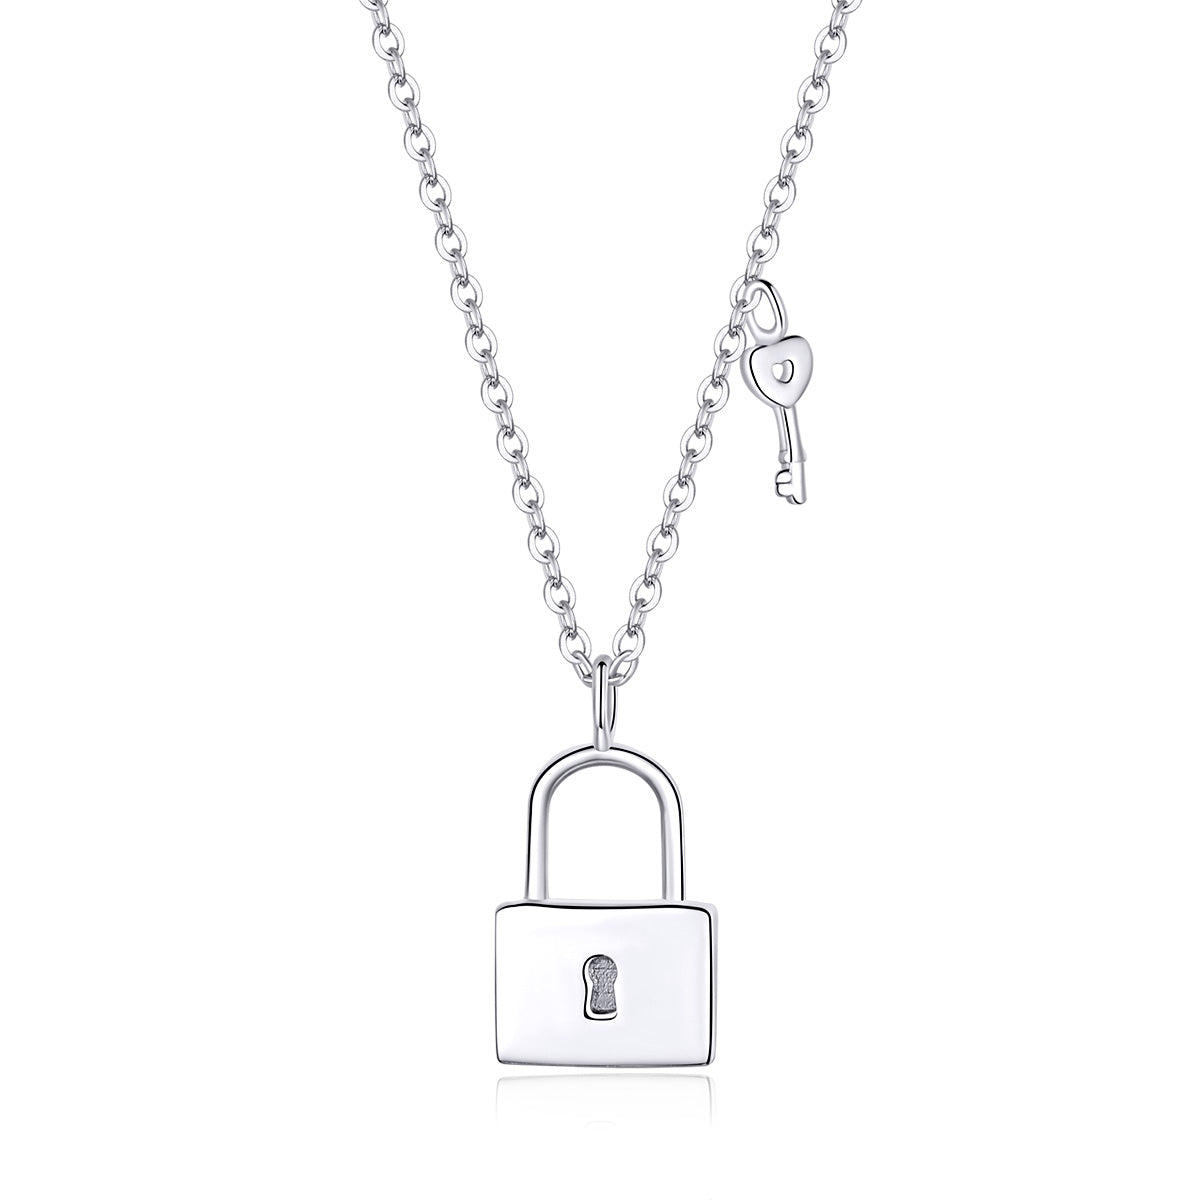 S925 Sterling Silver Love Lock Pendant Necklace White Gold Plated Neck